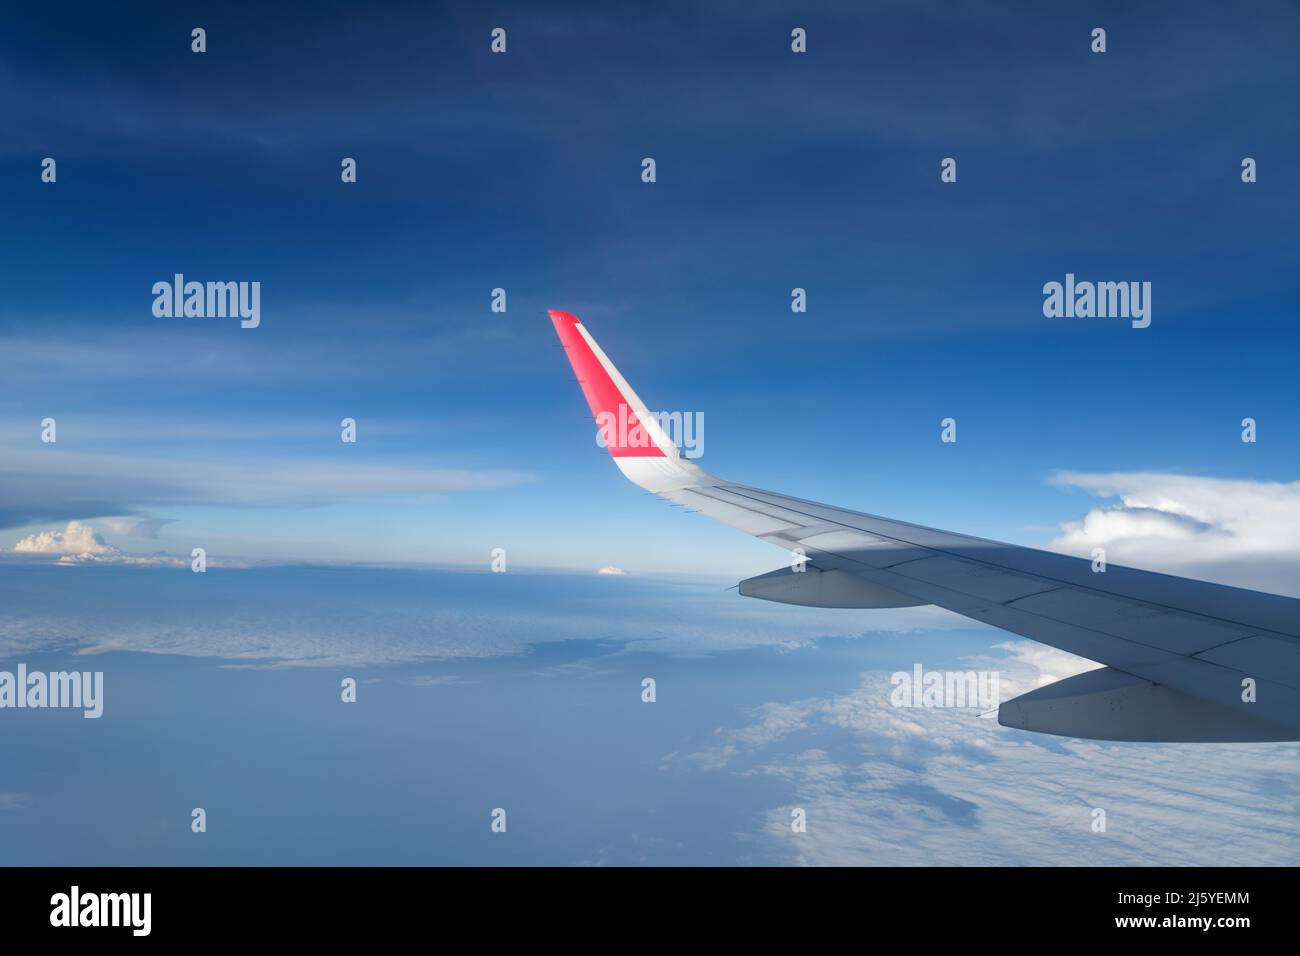 View of sky and clouds from aircraft window, on the way to Cochin, India. Stock Photo